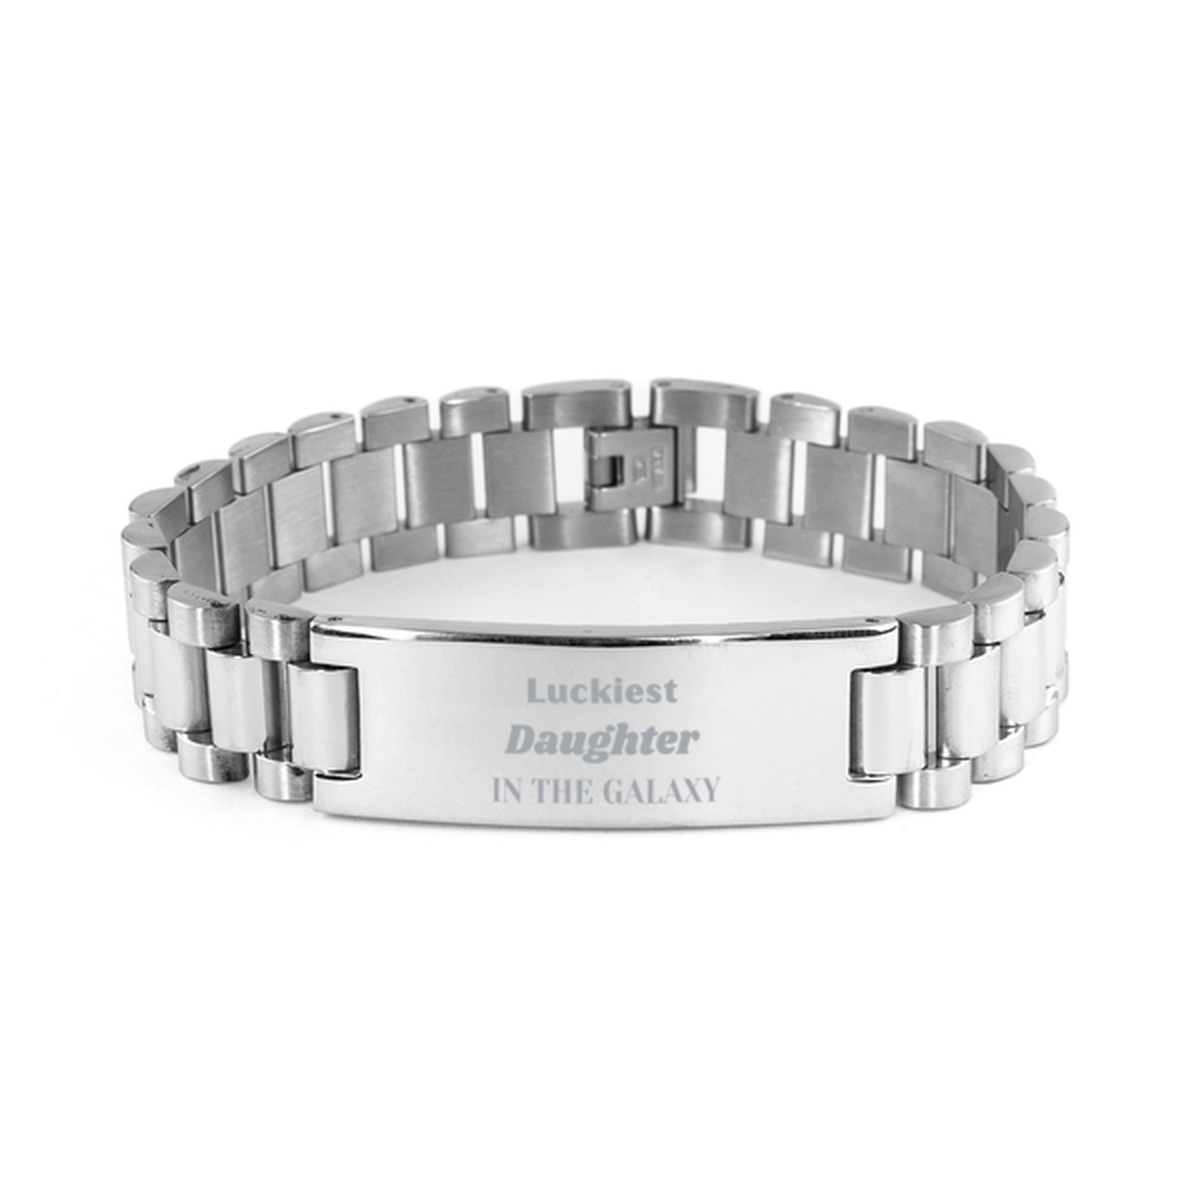 Luckiest Daughter in the Galaxy, To My Daughter Engraved Gifts, Christmas Daughter Ladder Stainless Steel Bracelet Gifts, X-mas Birthday Unique Gifts For Daughter Men Women